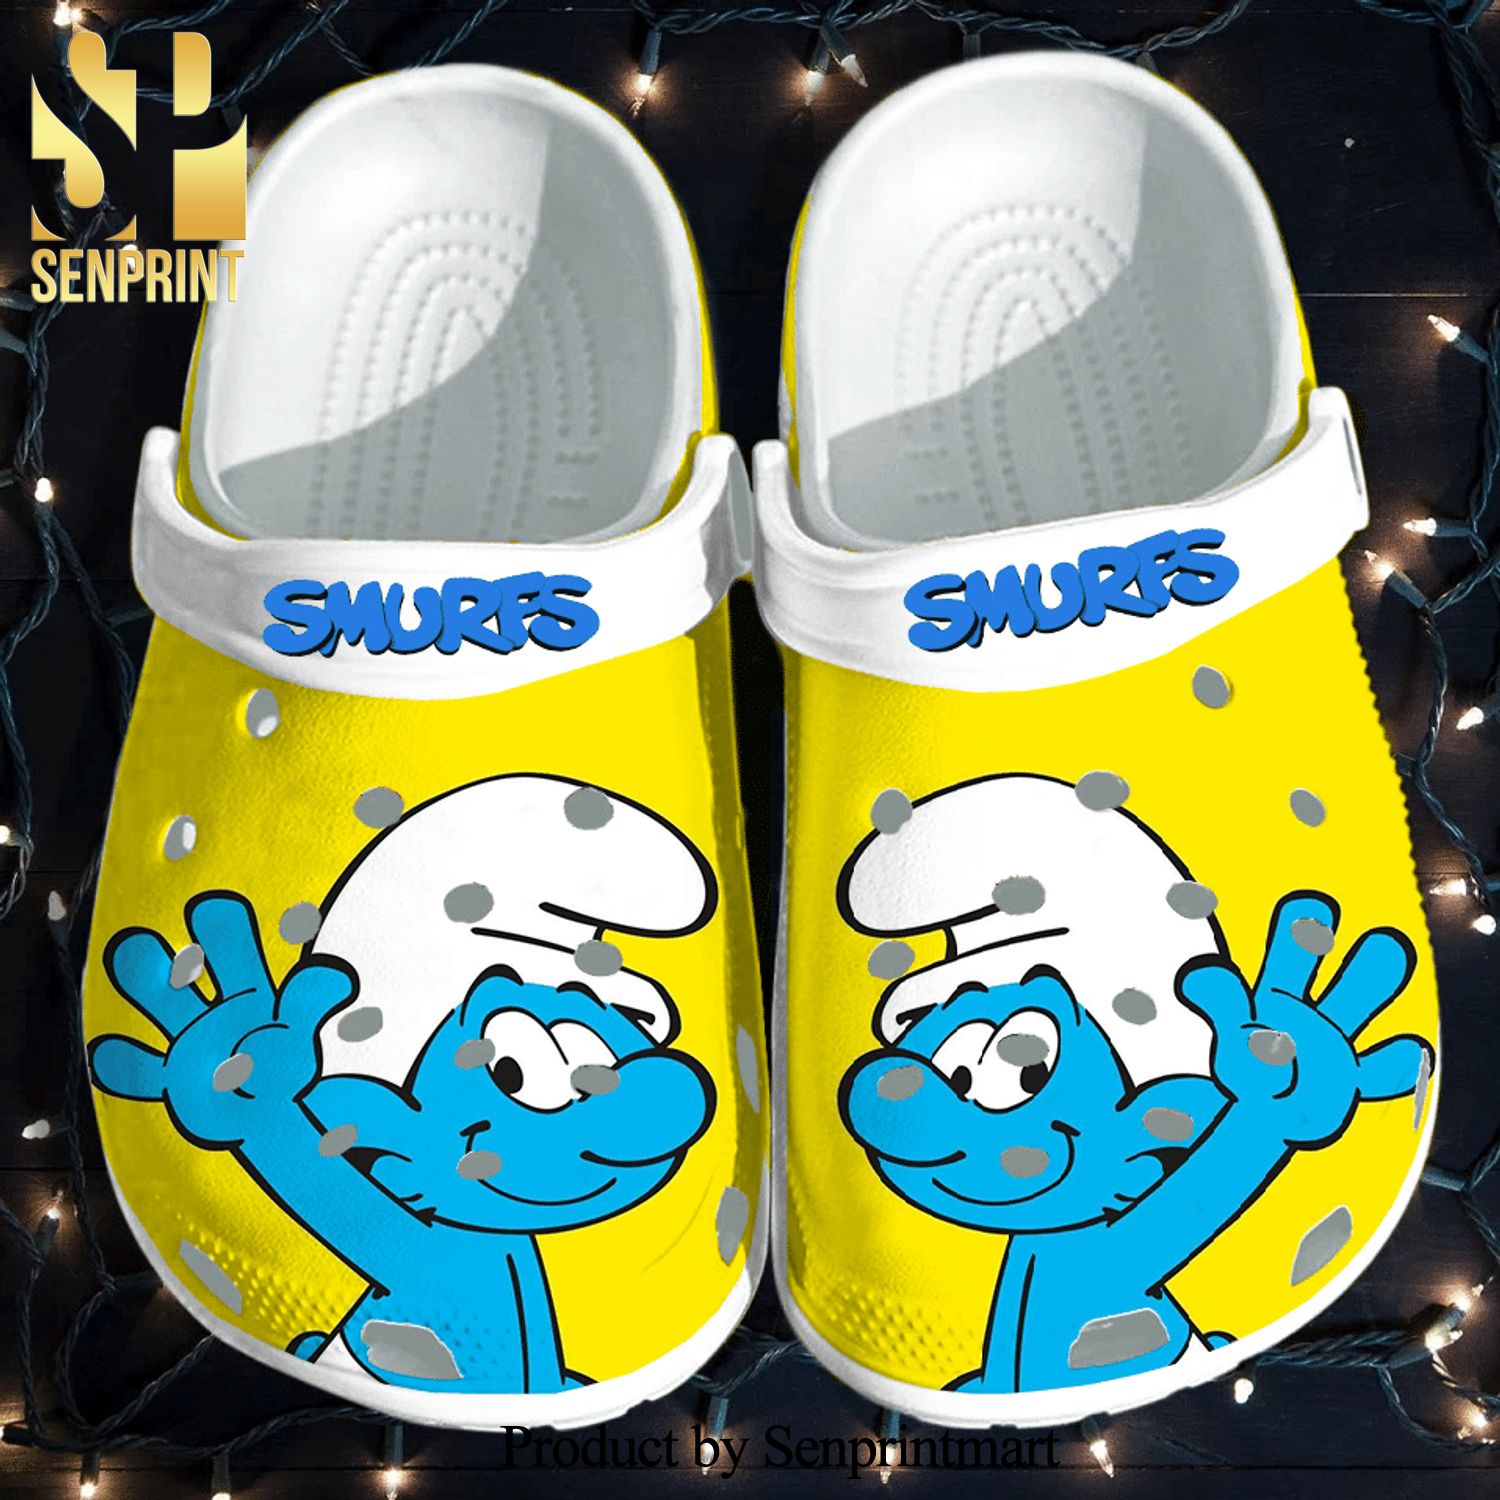 Smurfs 3 For Men And Women Hypebeast Fashion Crocs Shoes